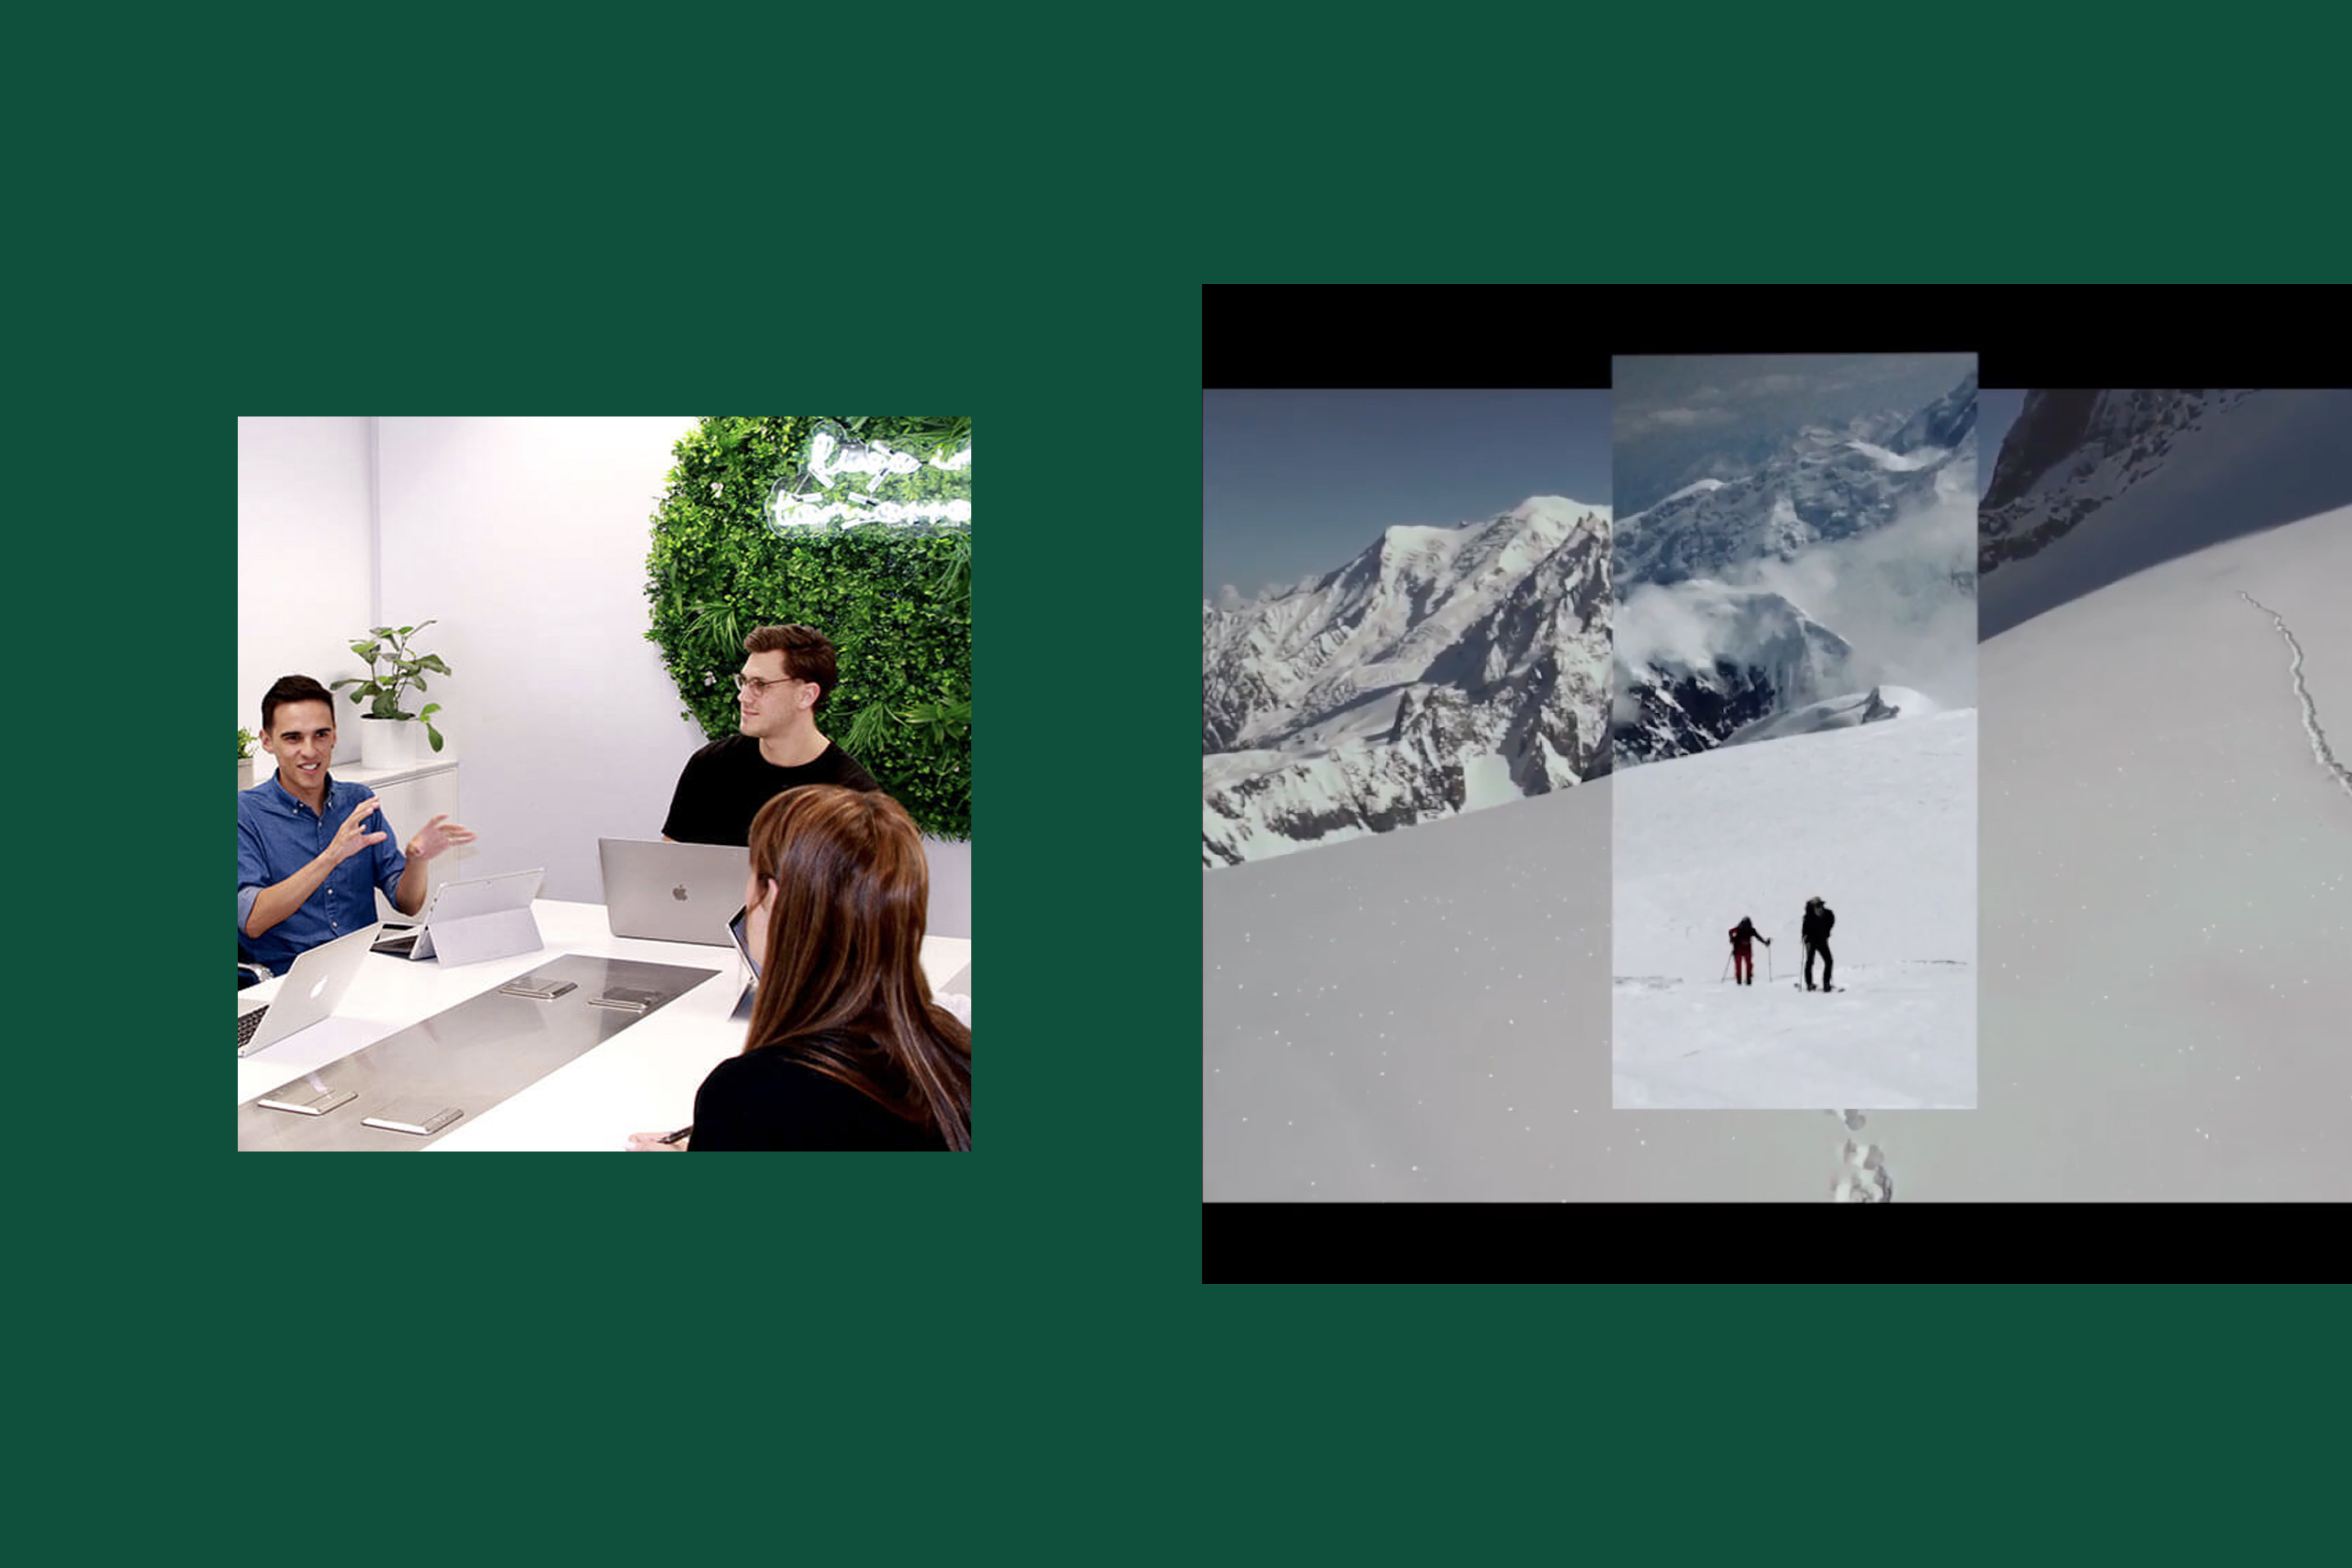 team of 3 collaborating in an office and ad campaign with skiers in mountains